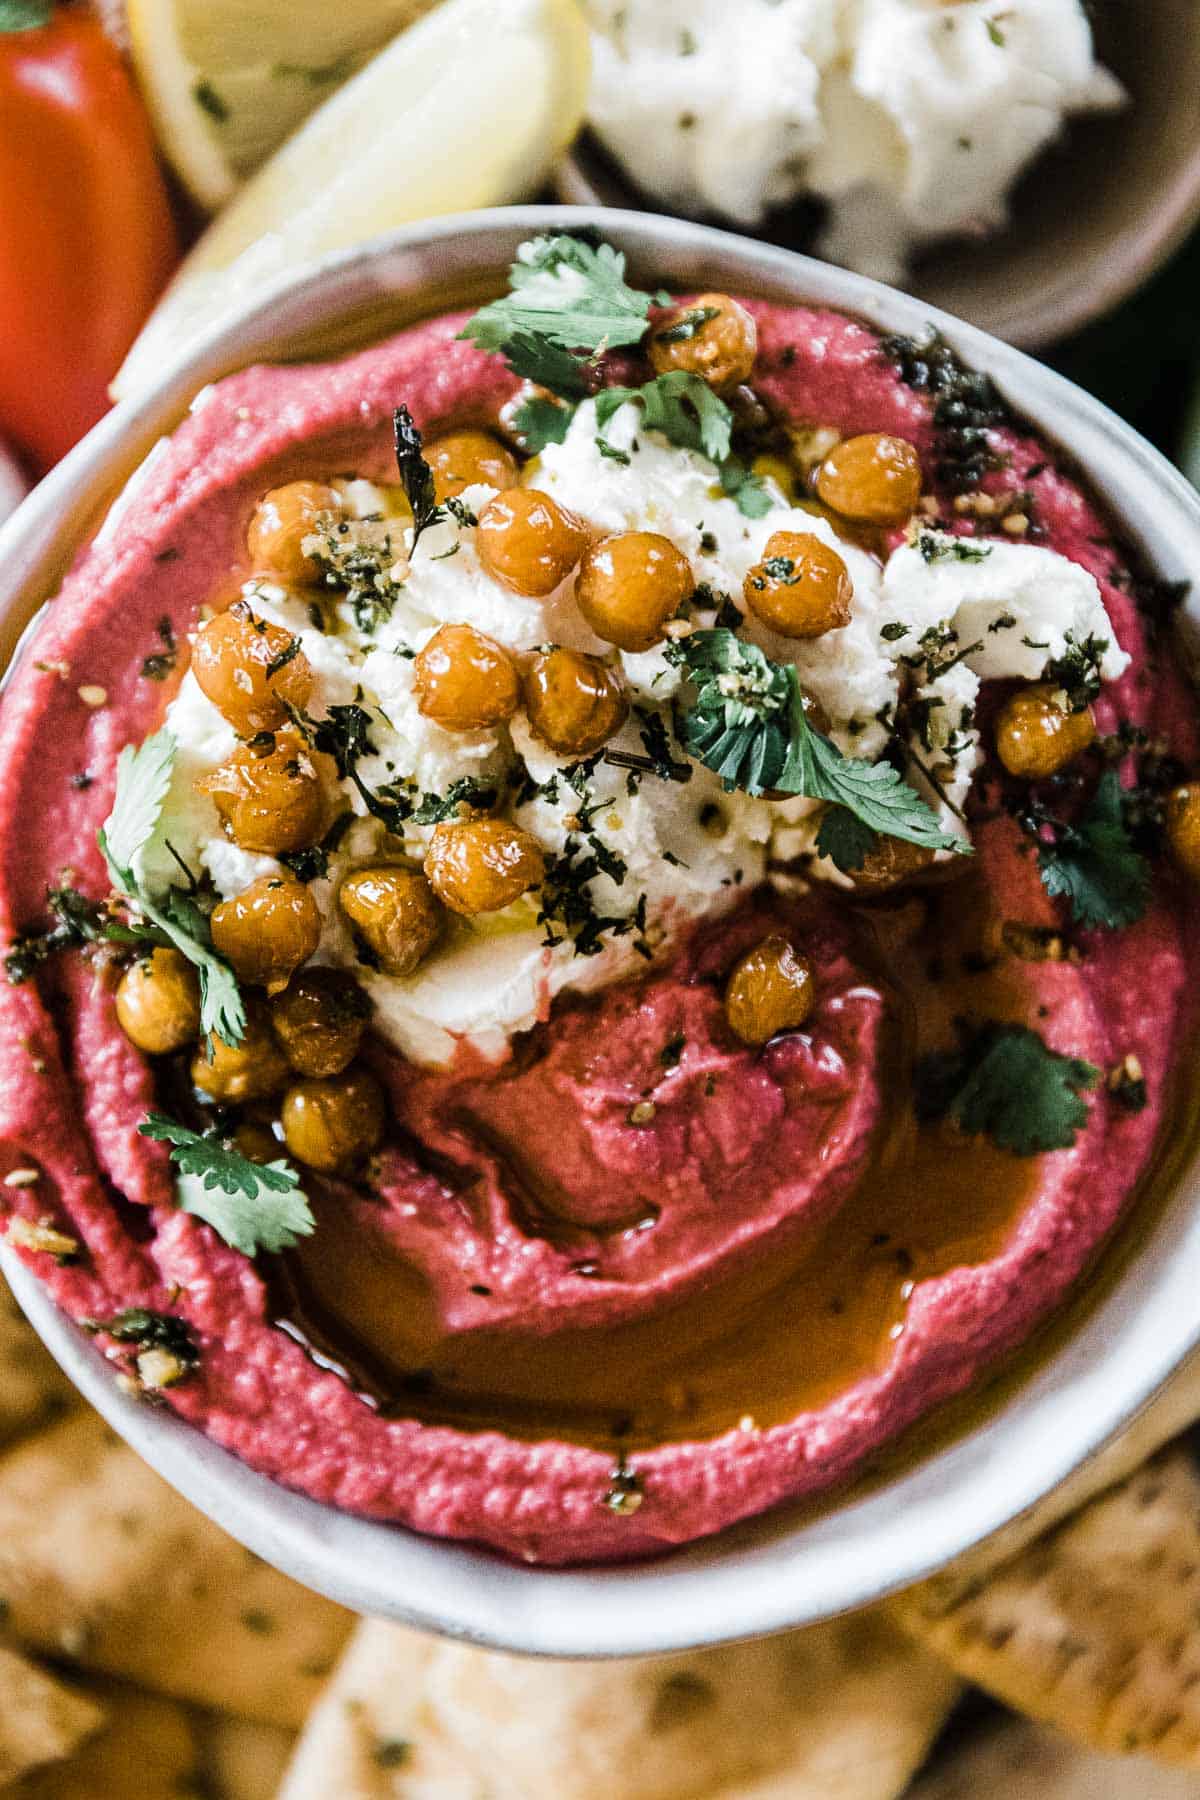 Beet hummus garnished with roasted chick peas and goat cheese.